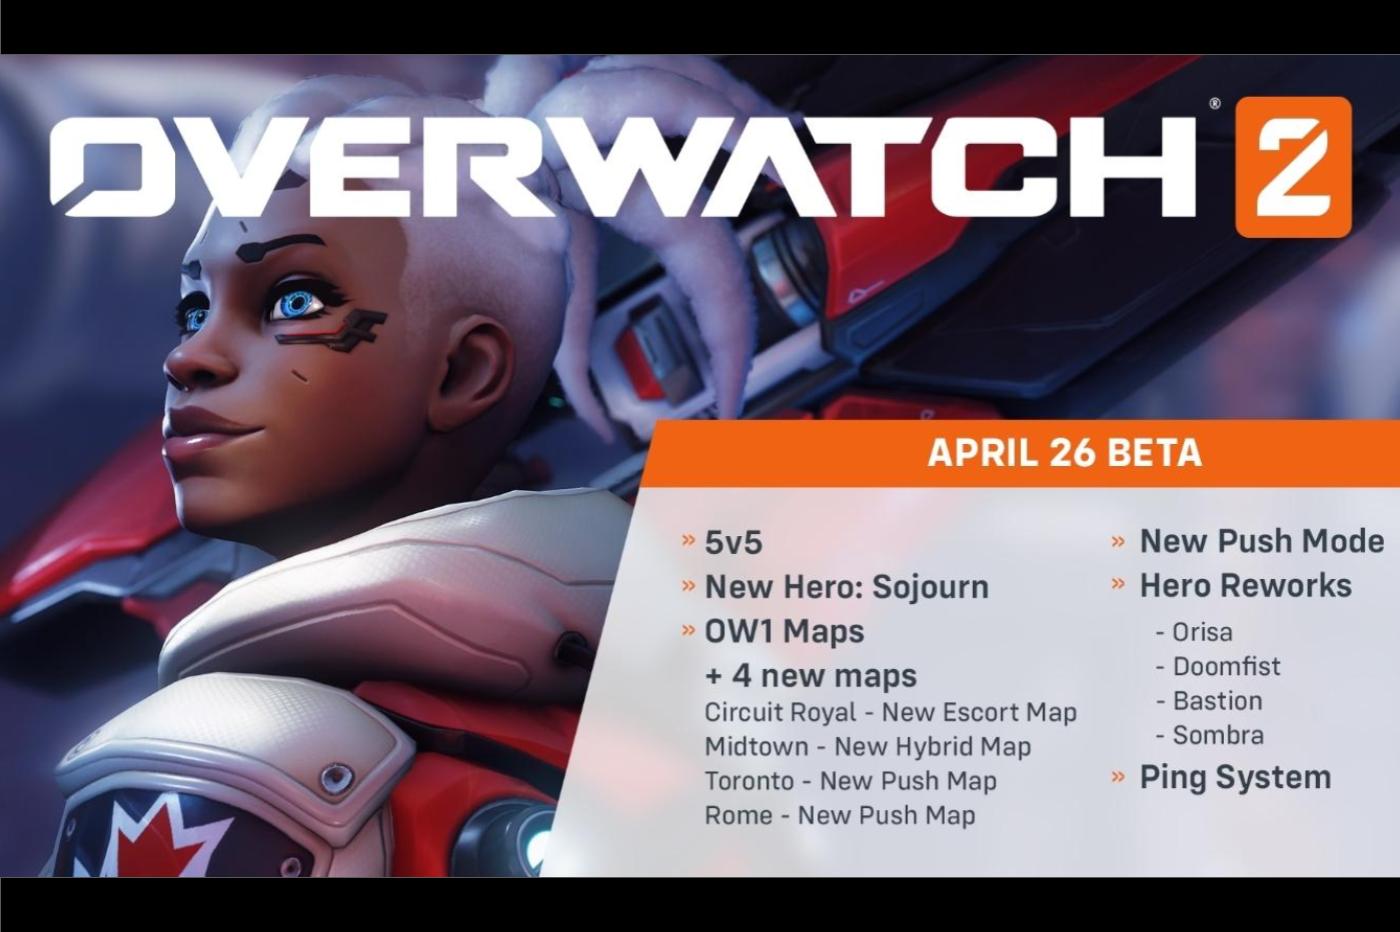 Poster detailing the beta of Overwatch 2 (details transcribed in the article)